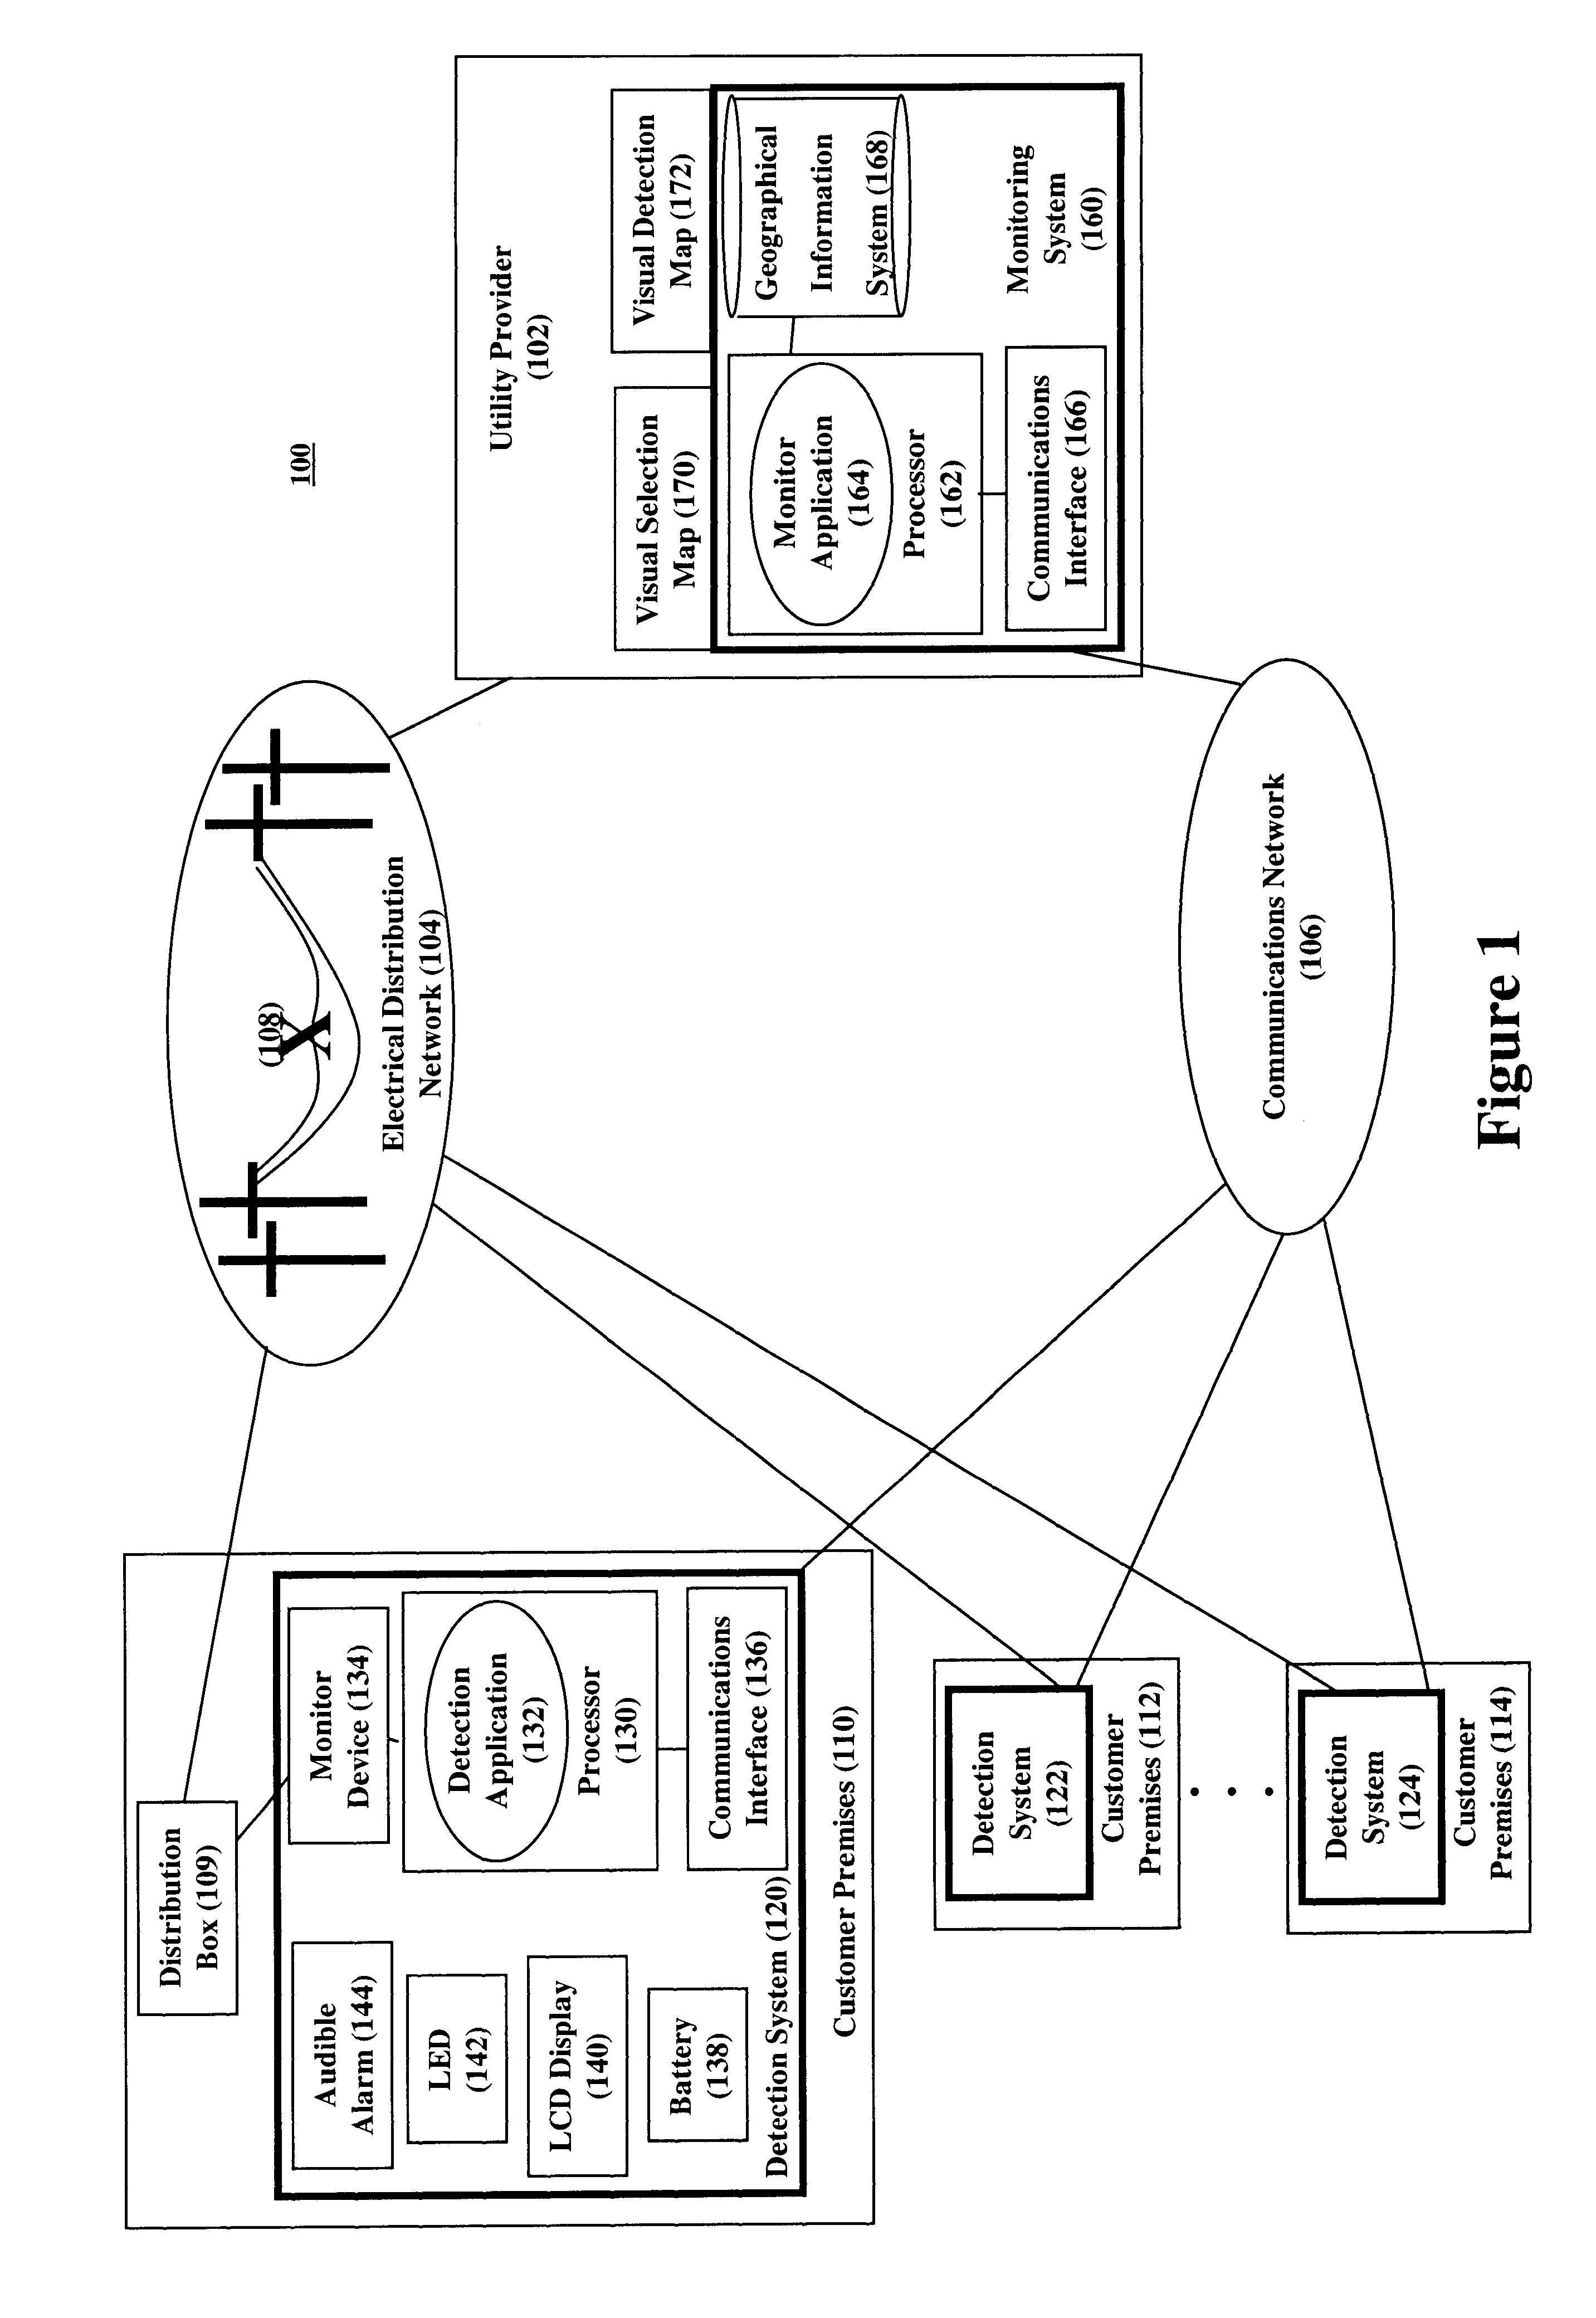 System and method for surveying utility outages